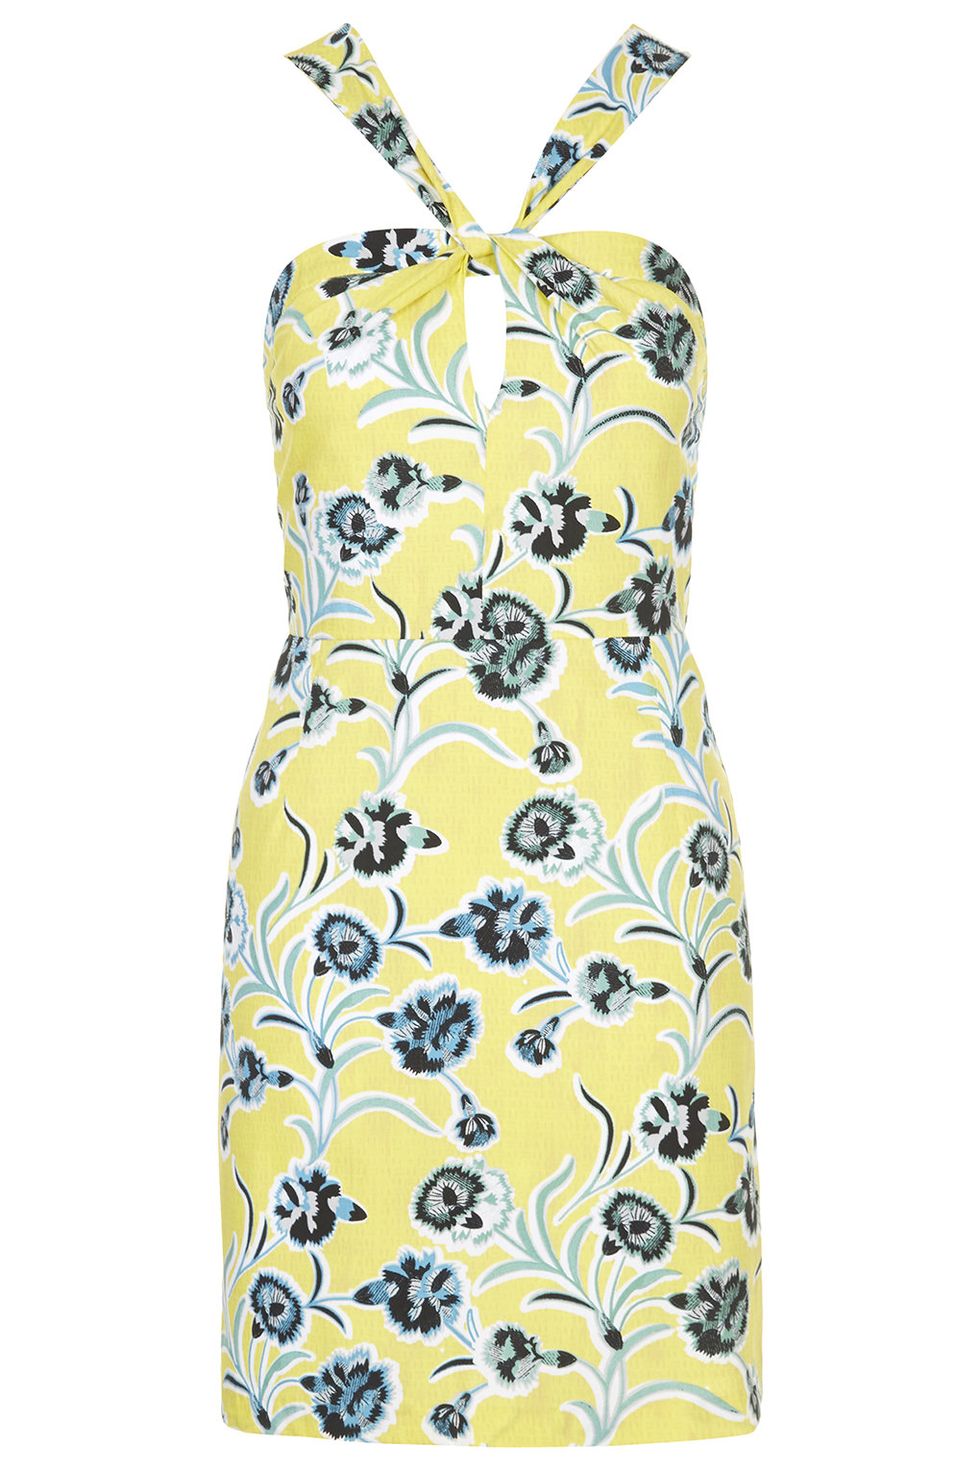 This yellow dress from Topshop will make it feel like summer